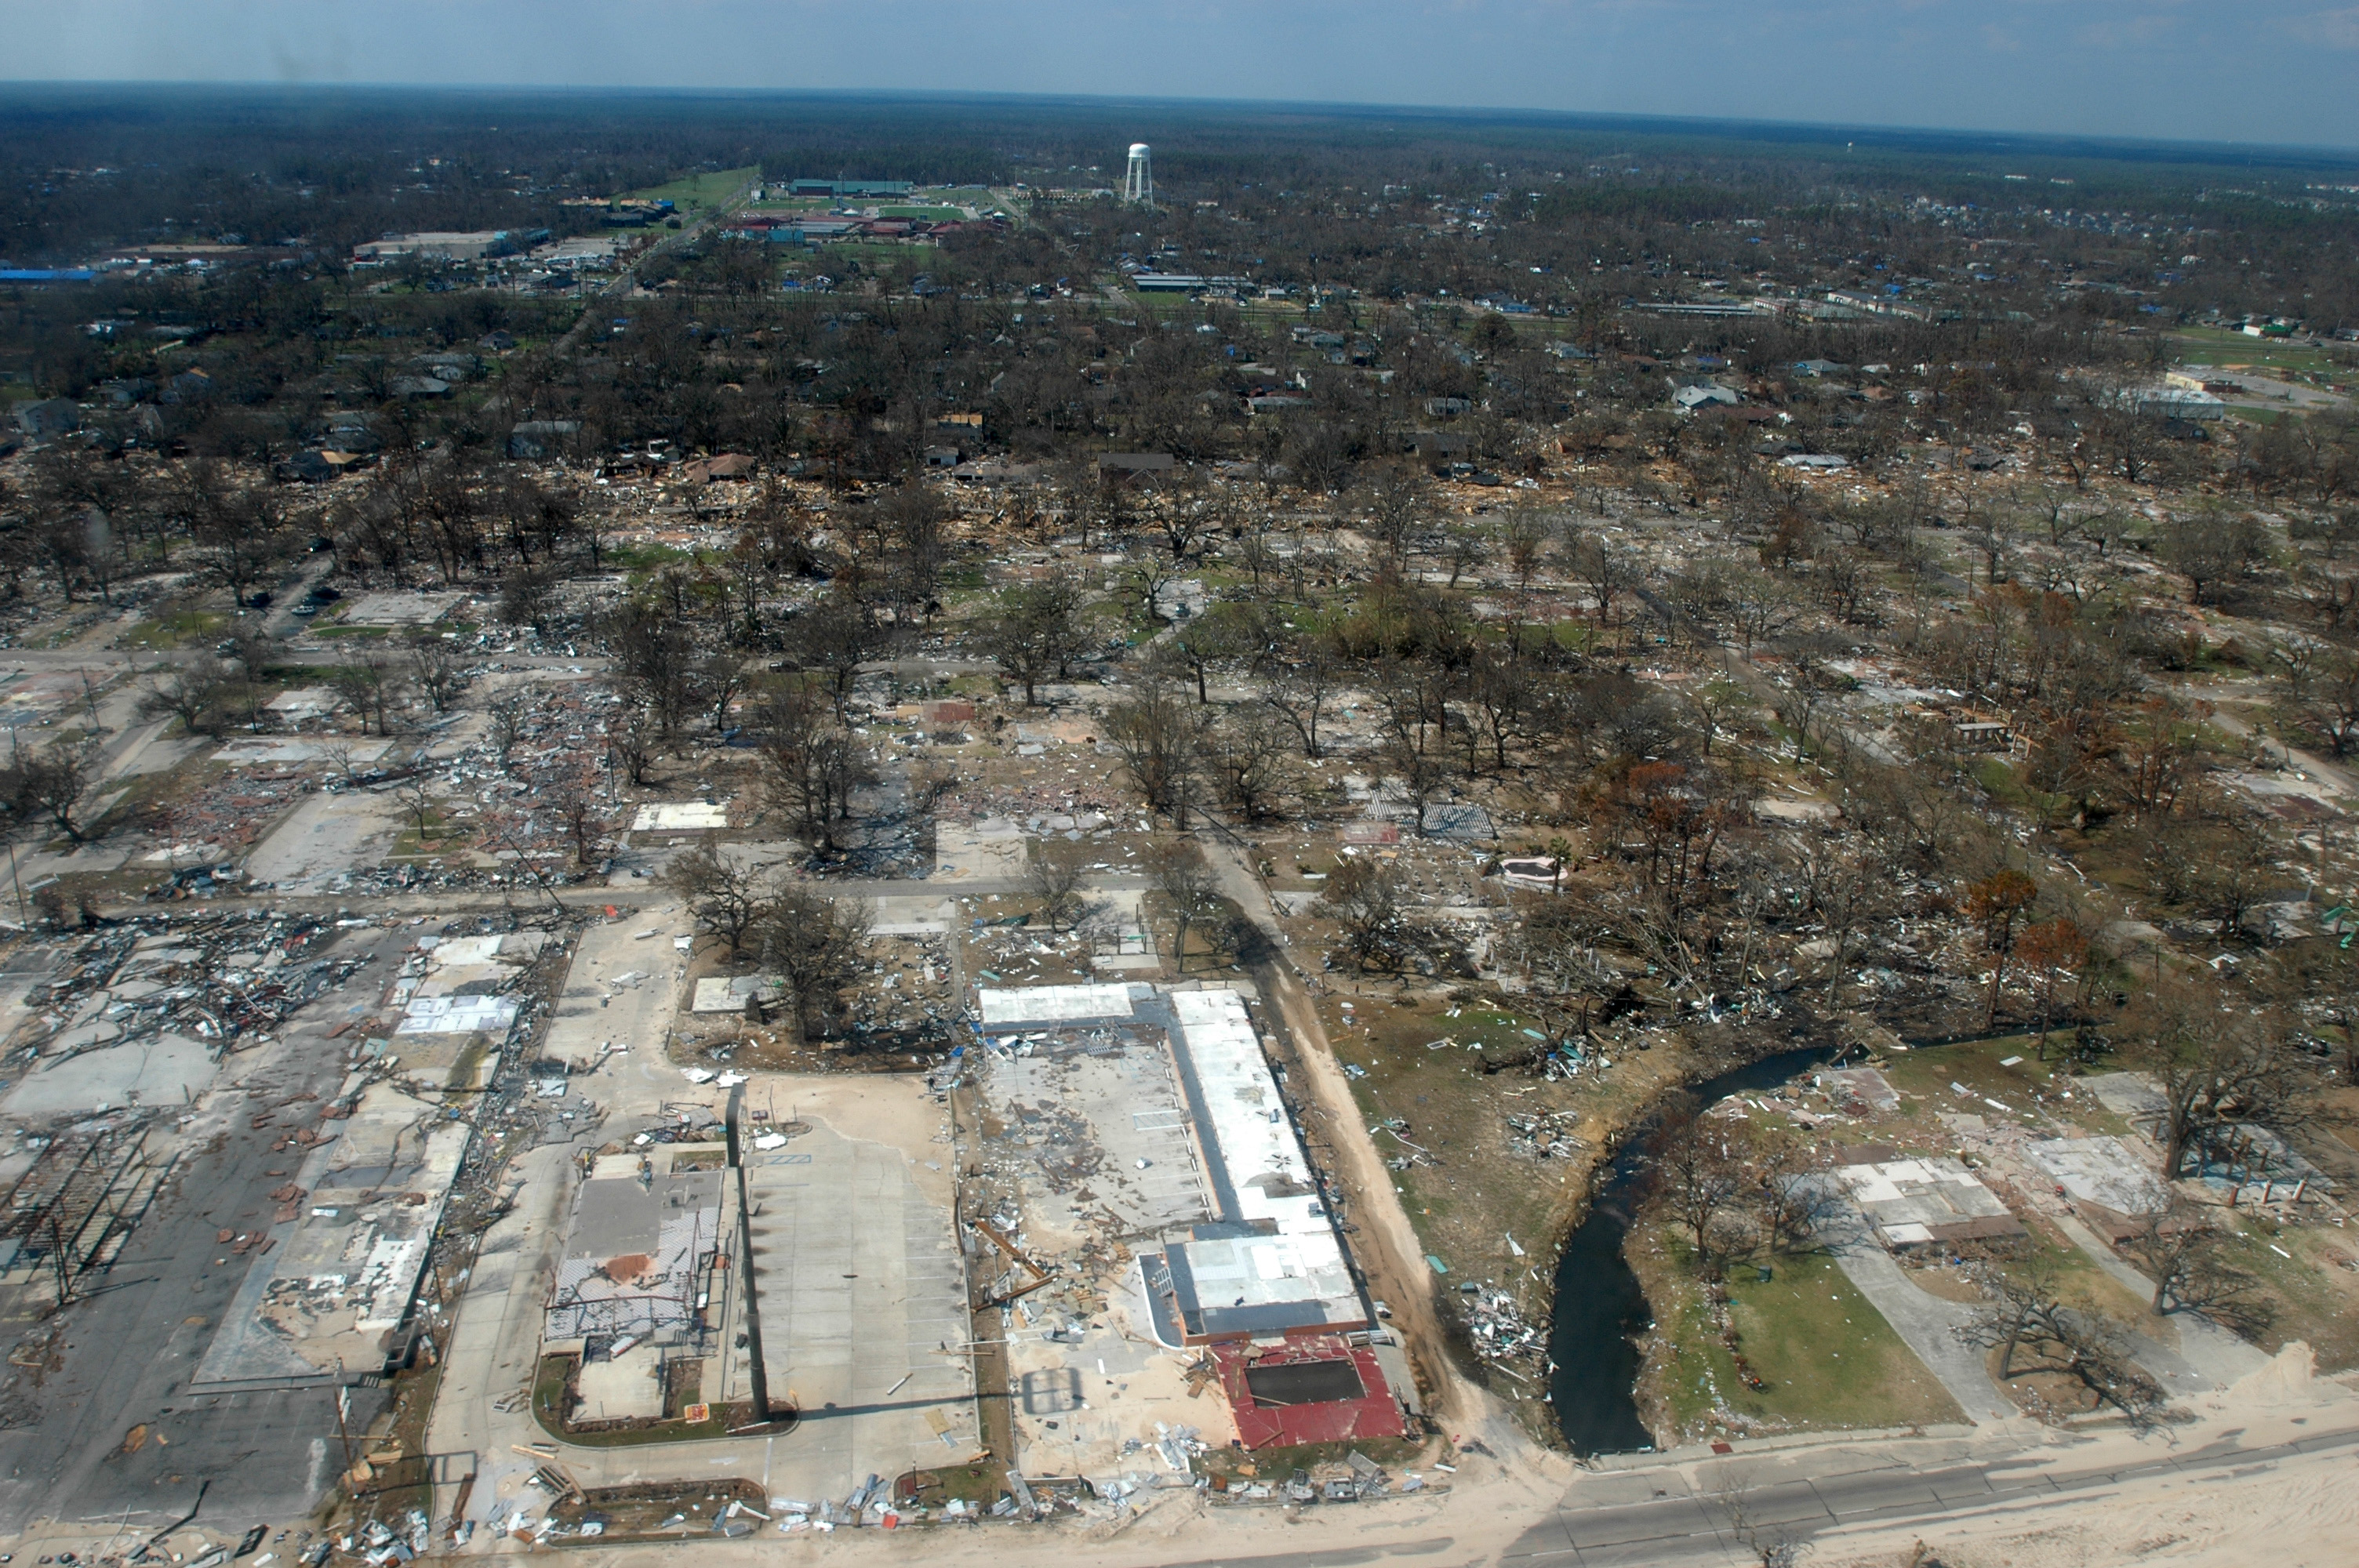 FEMA - 14796 - Photograph by Mark Wolfe taken on 09-06-2005 in Mississippi